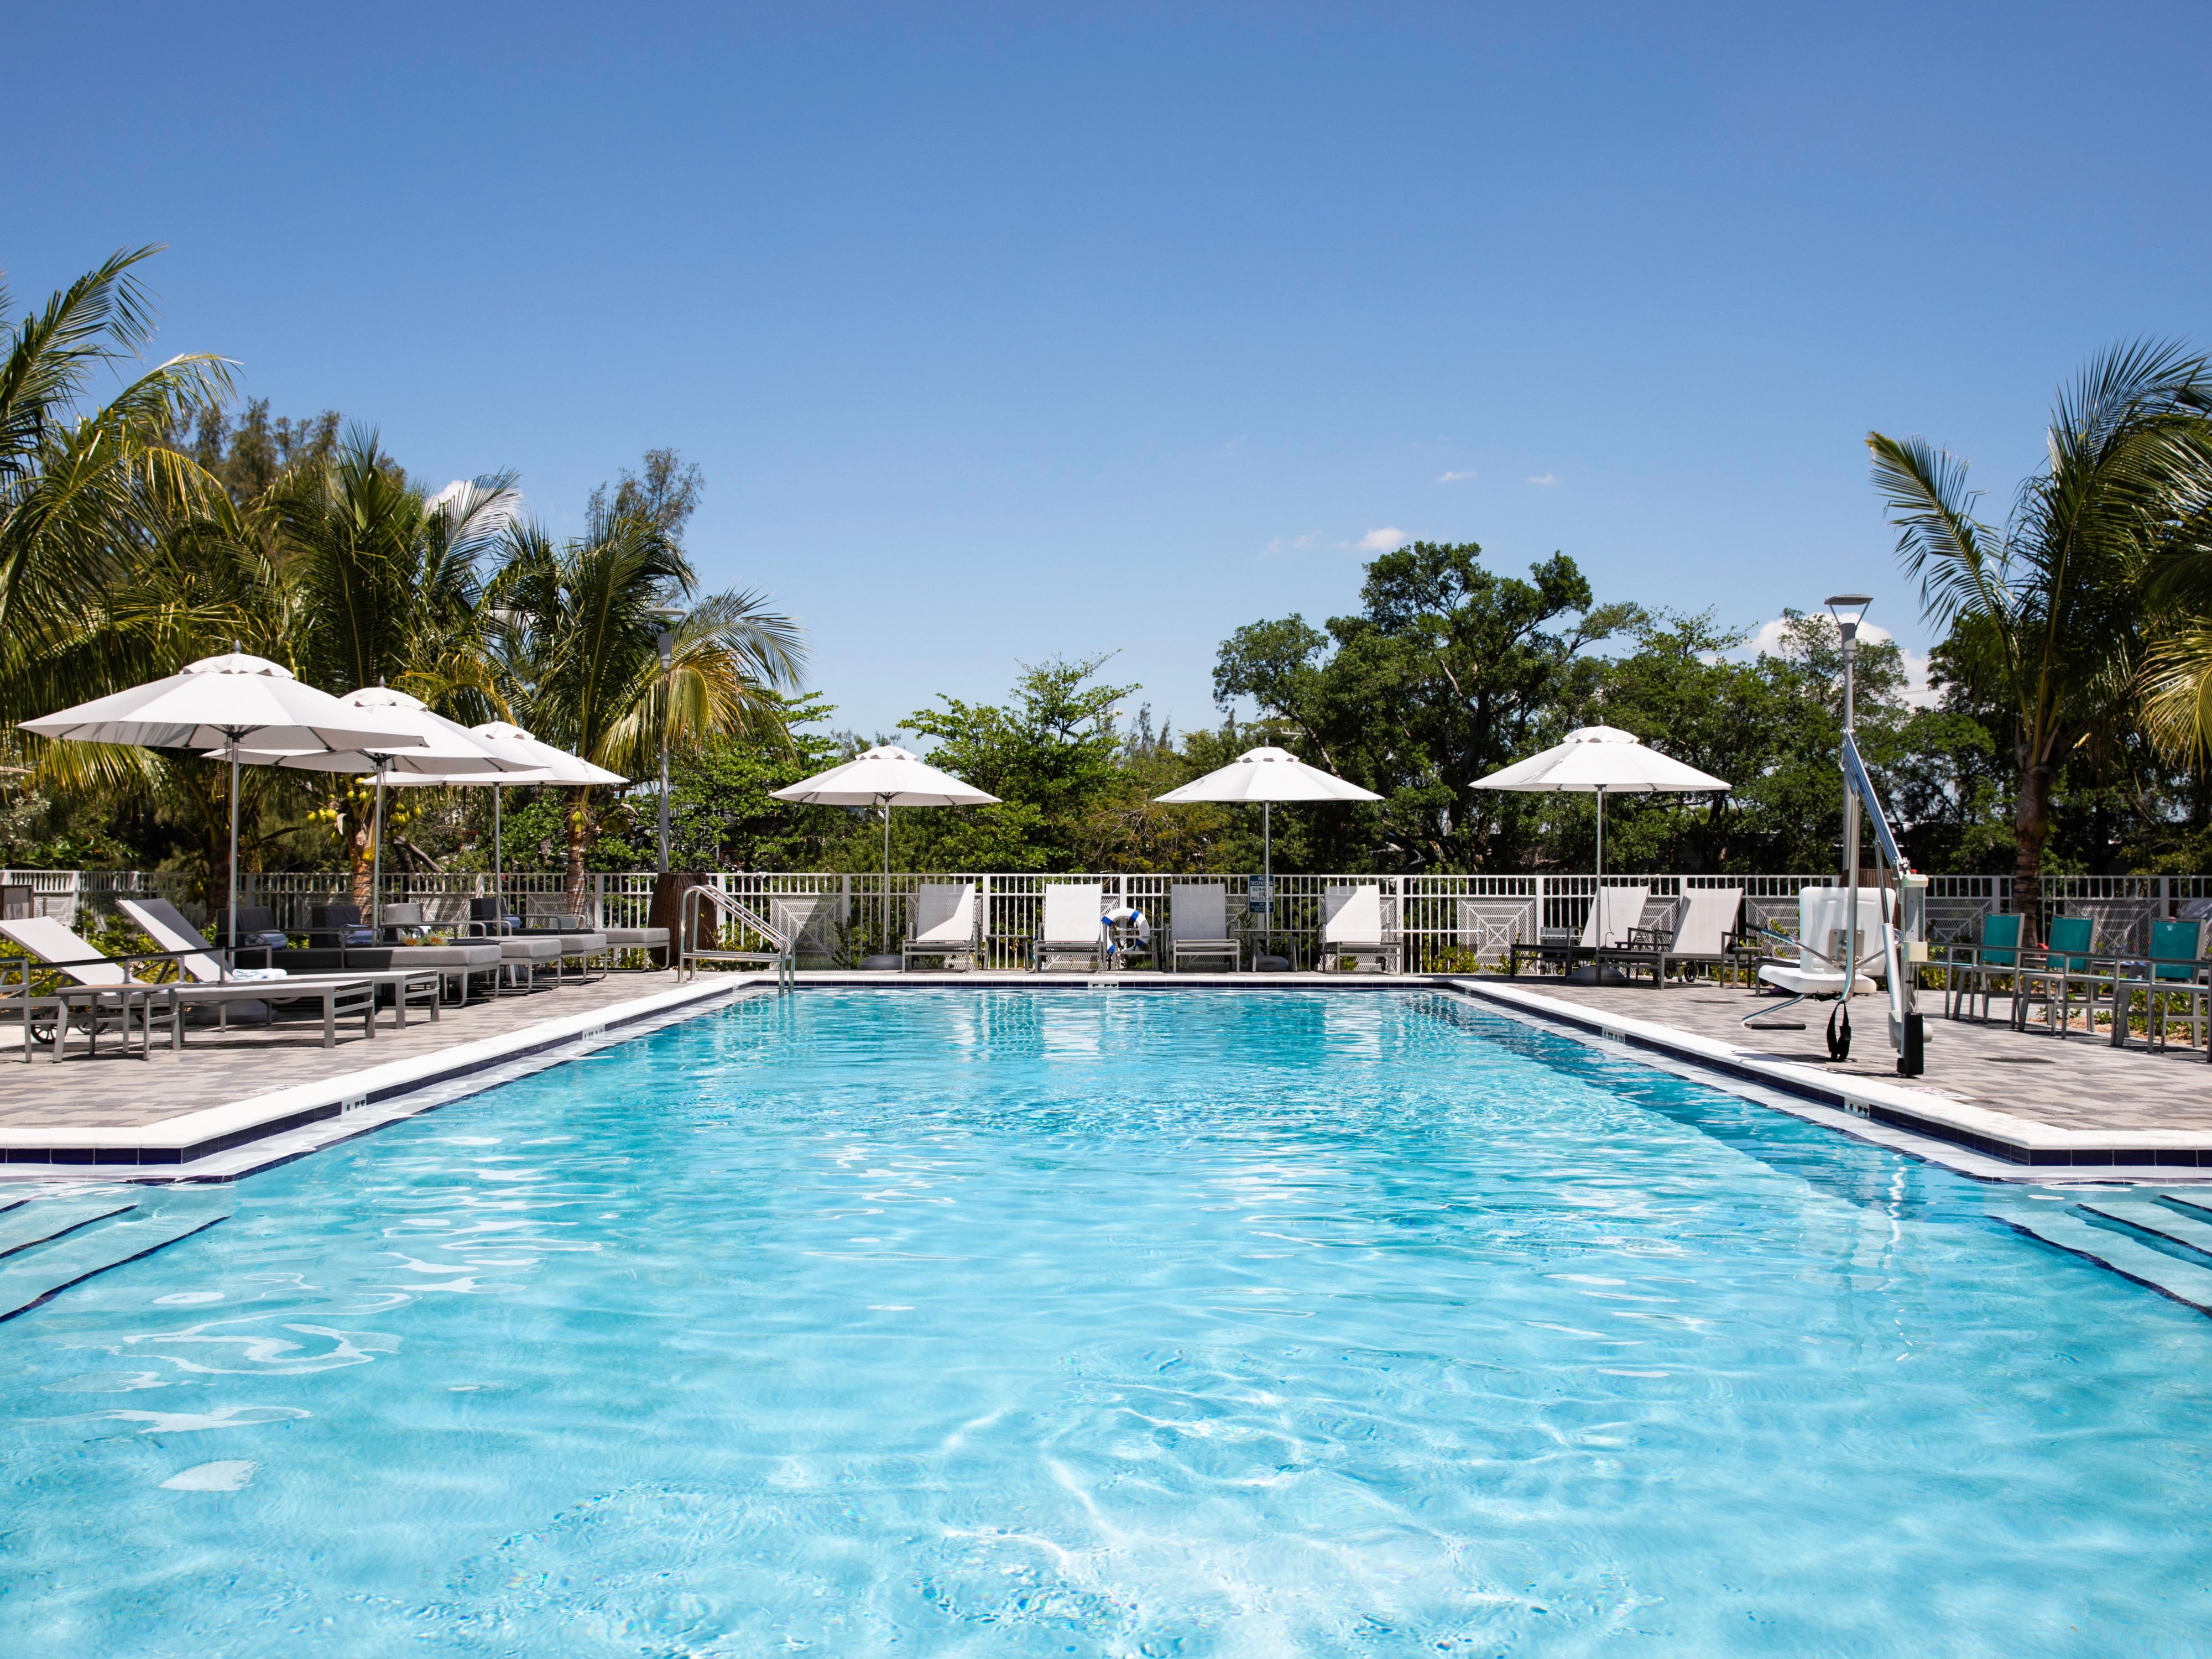 Enjoy a refreshing dip in our Miami airport hotel pool or relax poolside in a comfortable lounge. Whether you've spent the day exploring Miami's attractions or attending lengthy business meetings, our peaceful pool oasis provides the perfect setting to unwind and recharge. With Miami’s beautiful weather, our outdoor pool is open all year round.